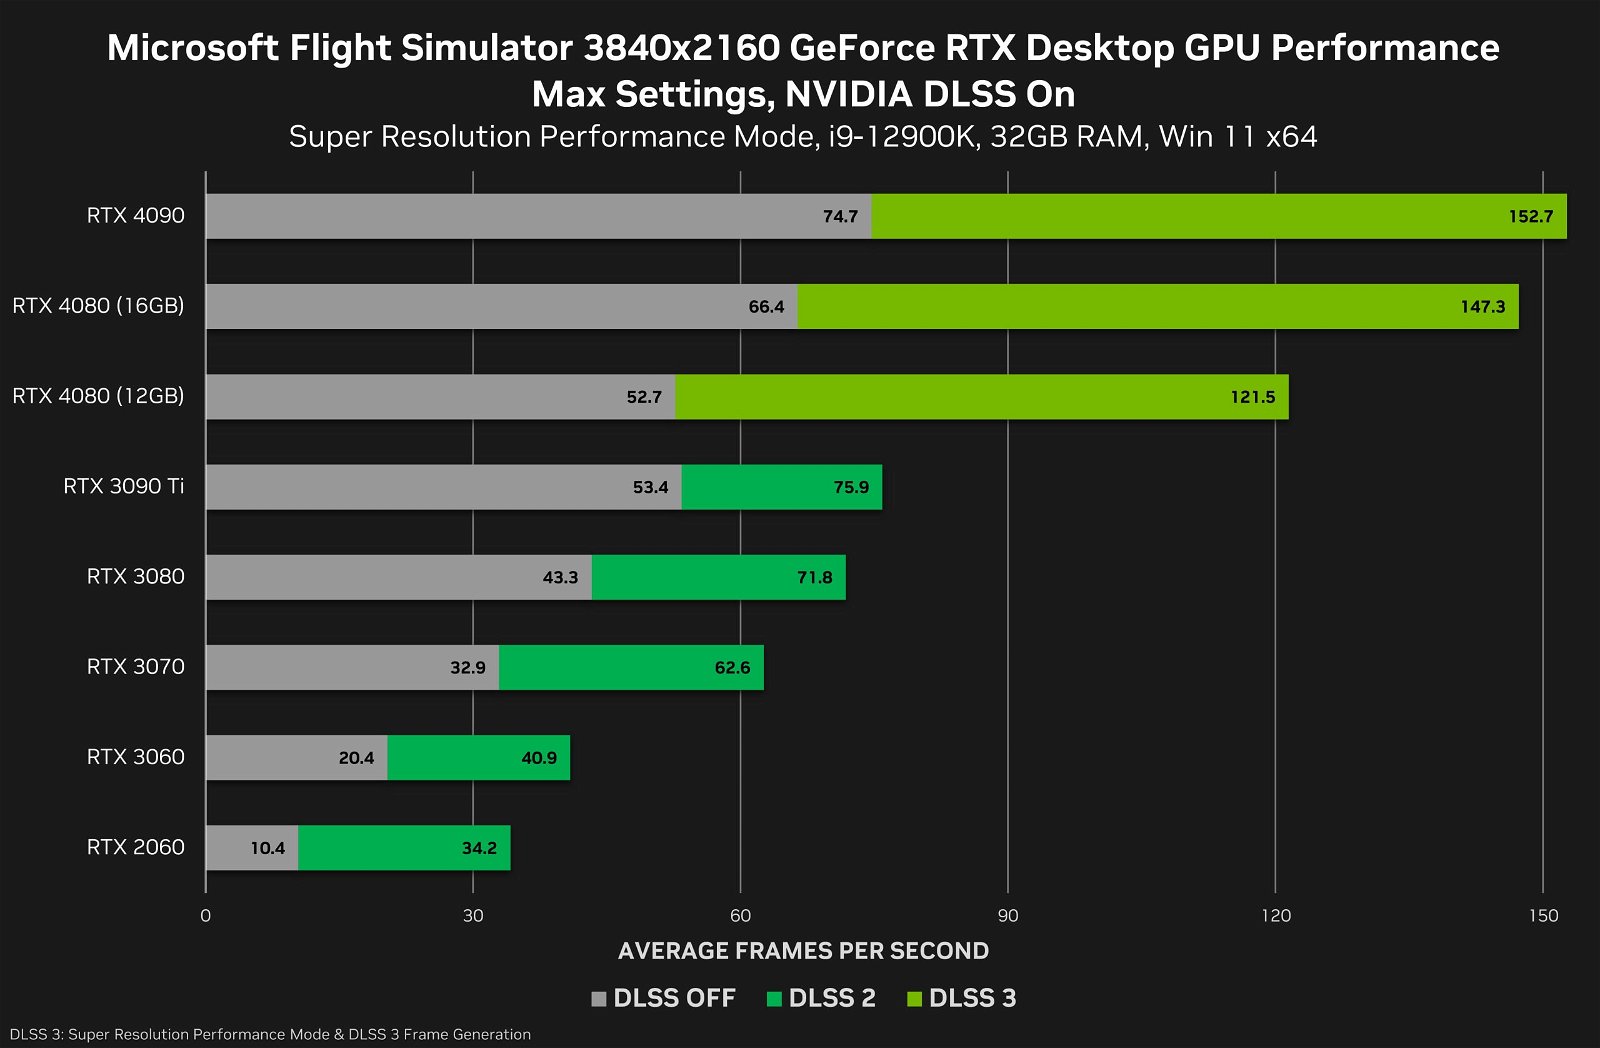 Nvidia GeForce RTX 4080 16GB Review [Content Creation, Rendering